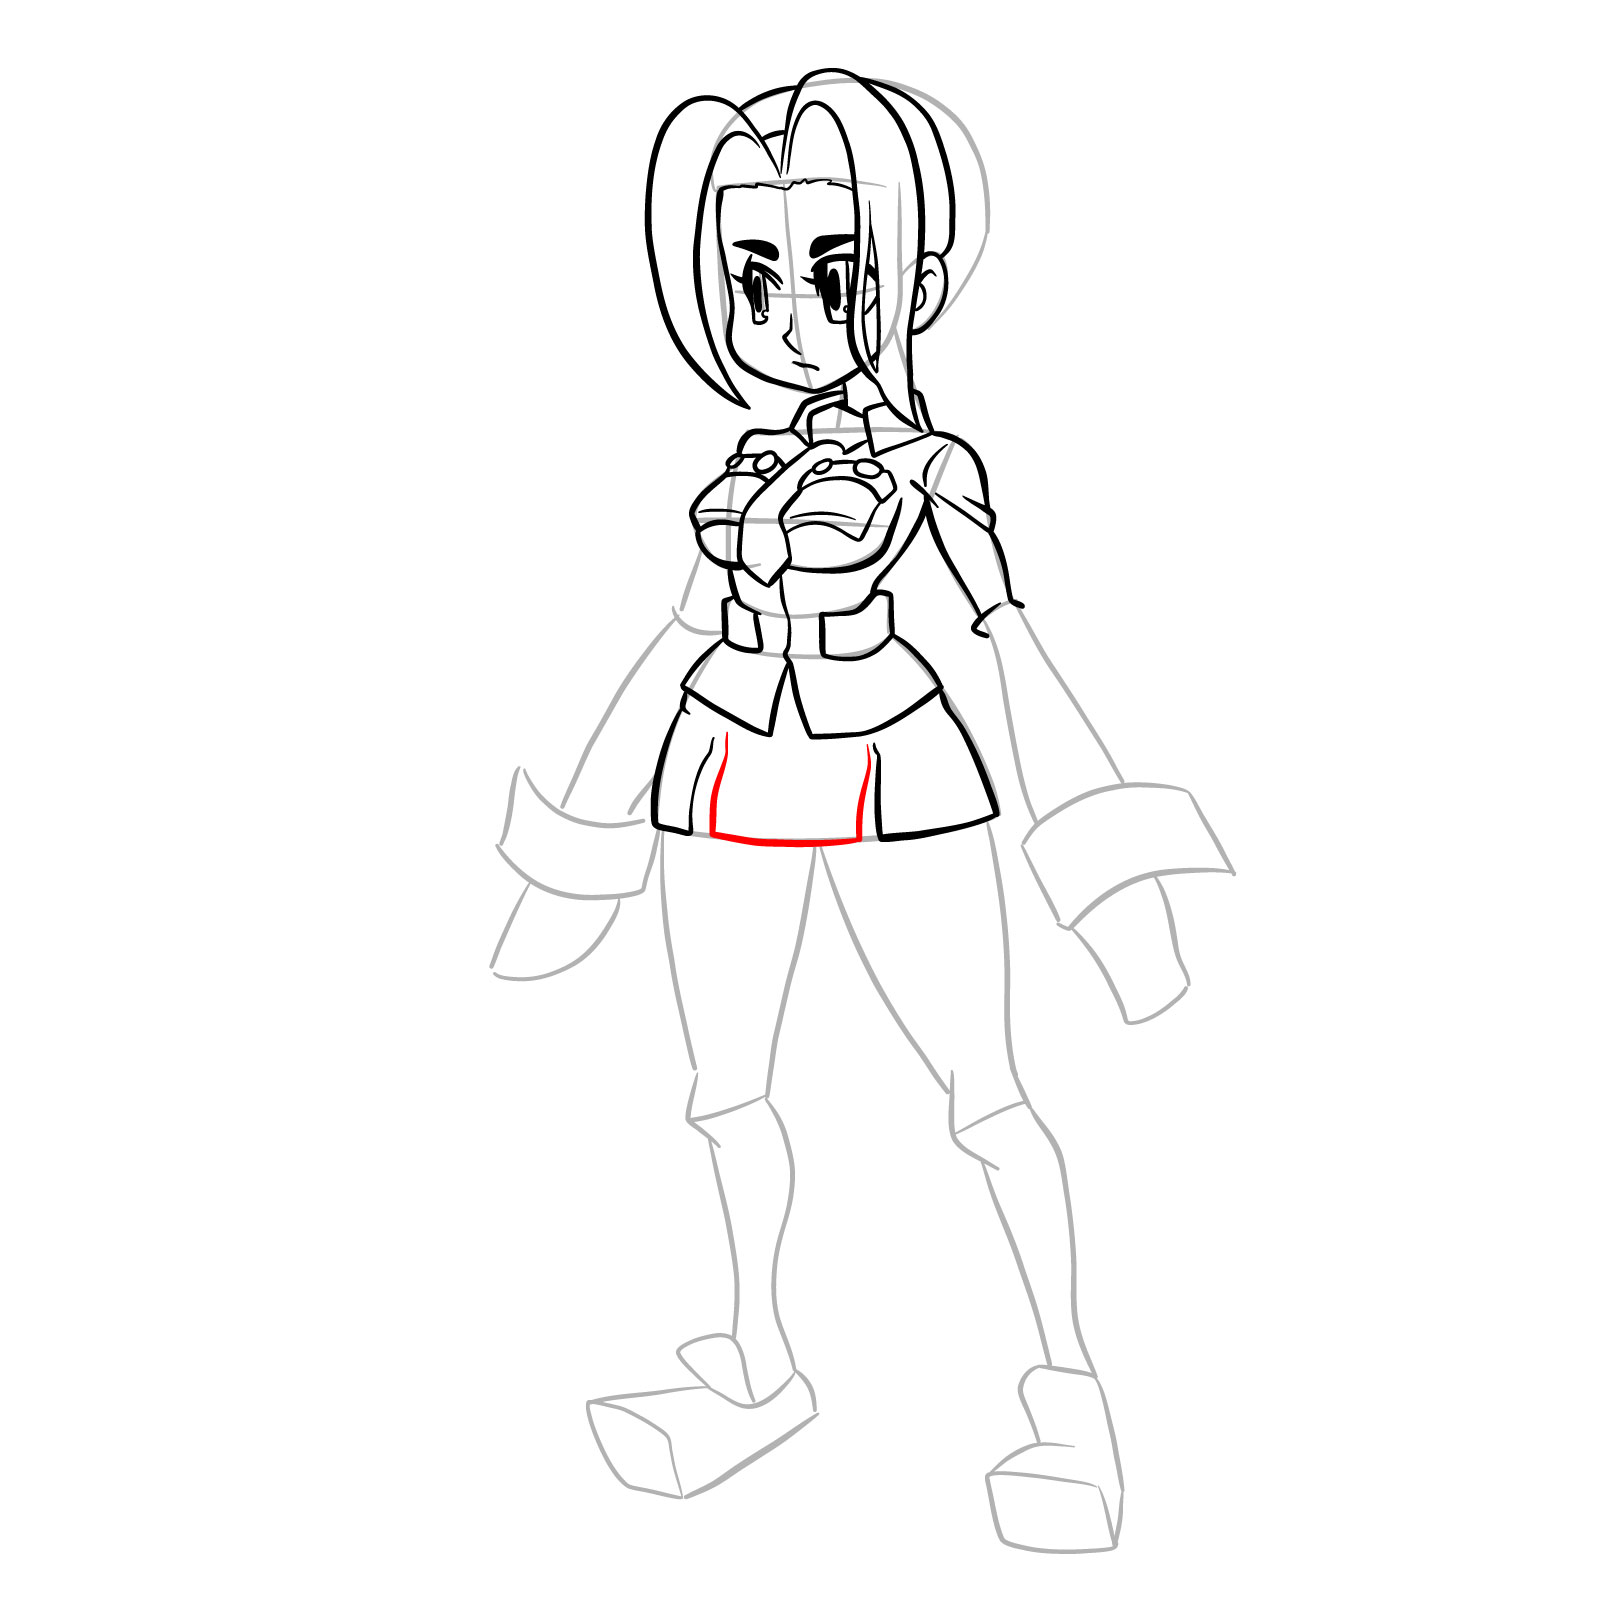 How to draw Filia from Skullgirls - step 24